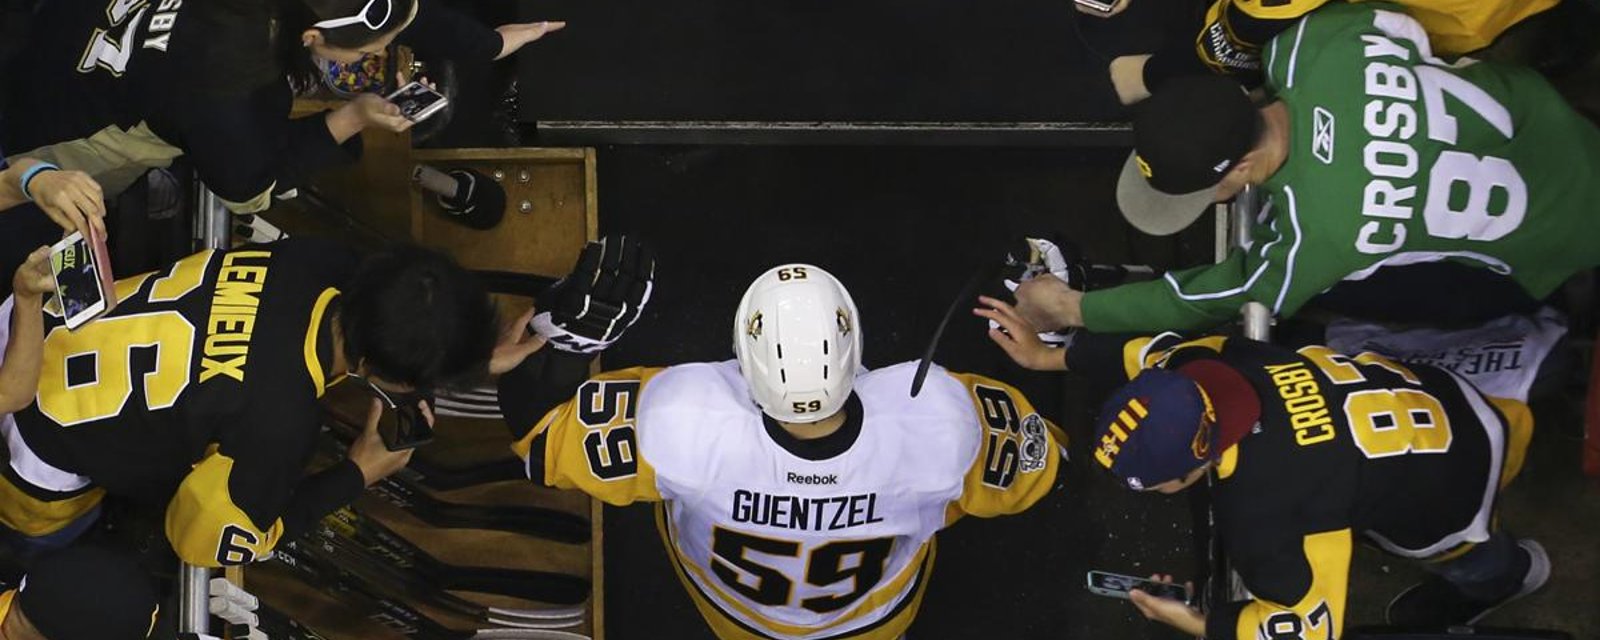 MUST READ : Guentzel recalls first meeting with Kessel as a kid. 